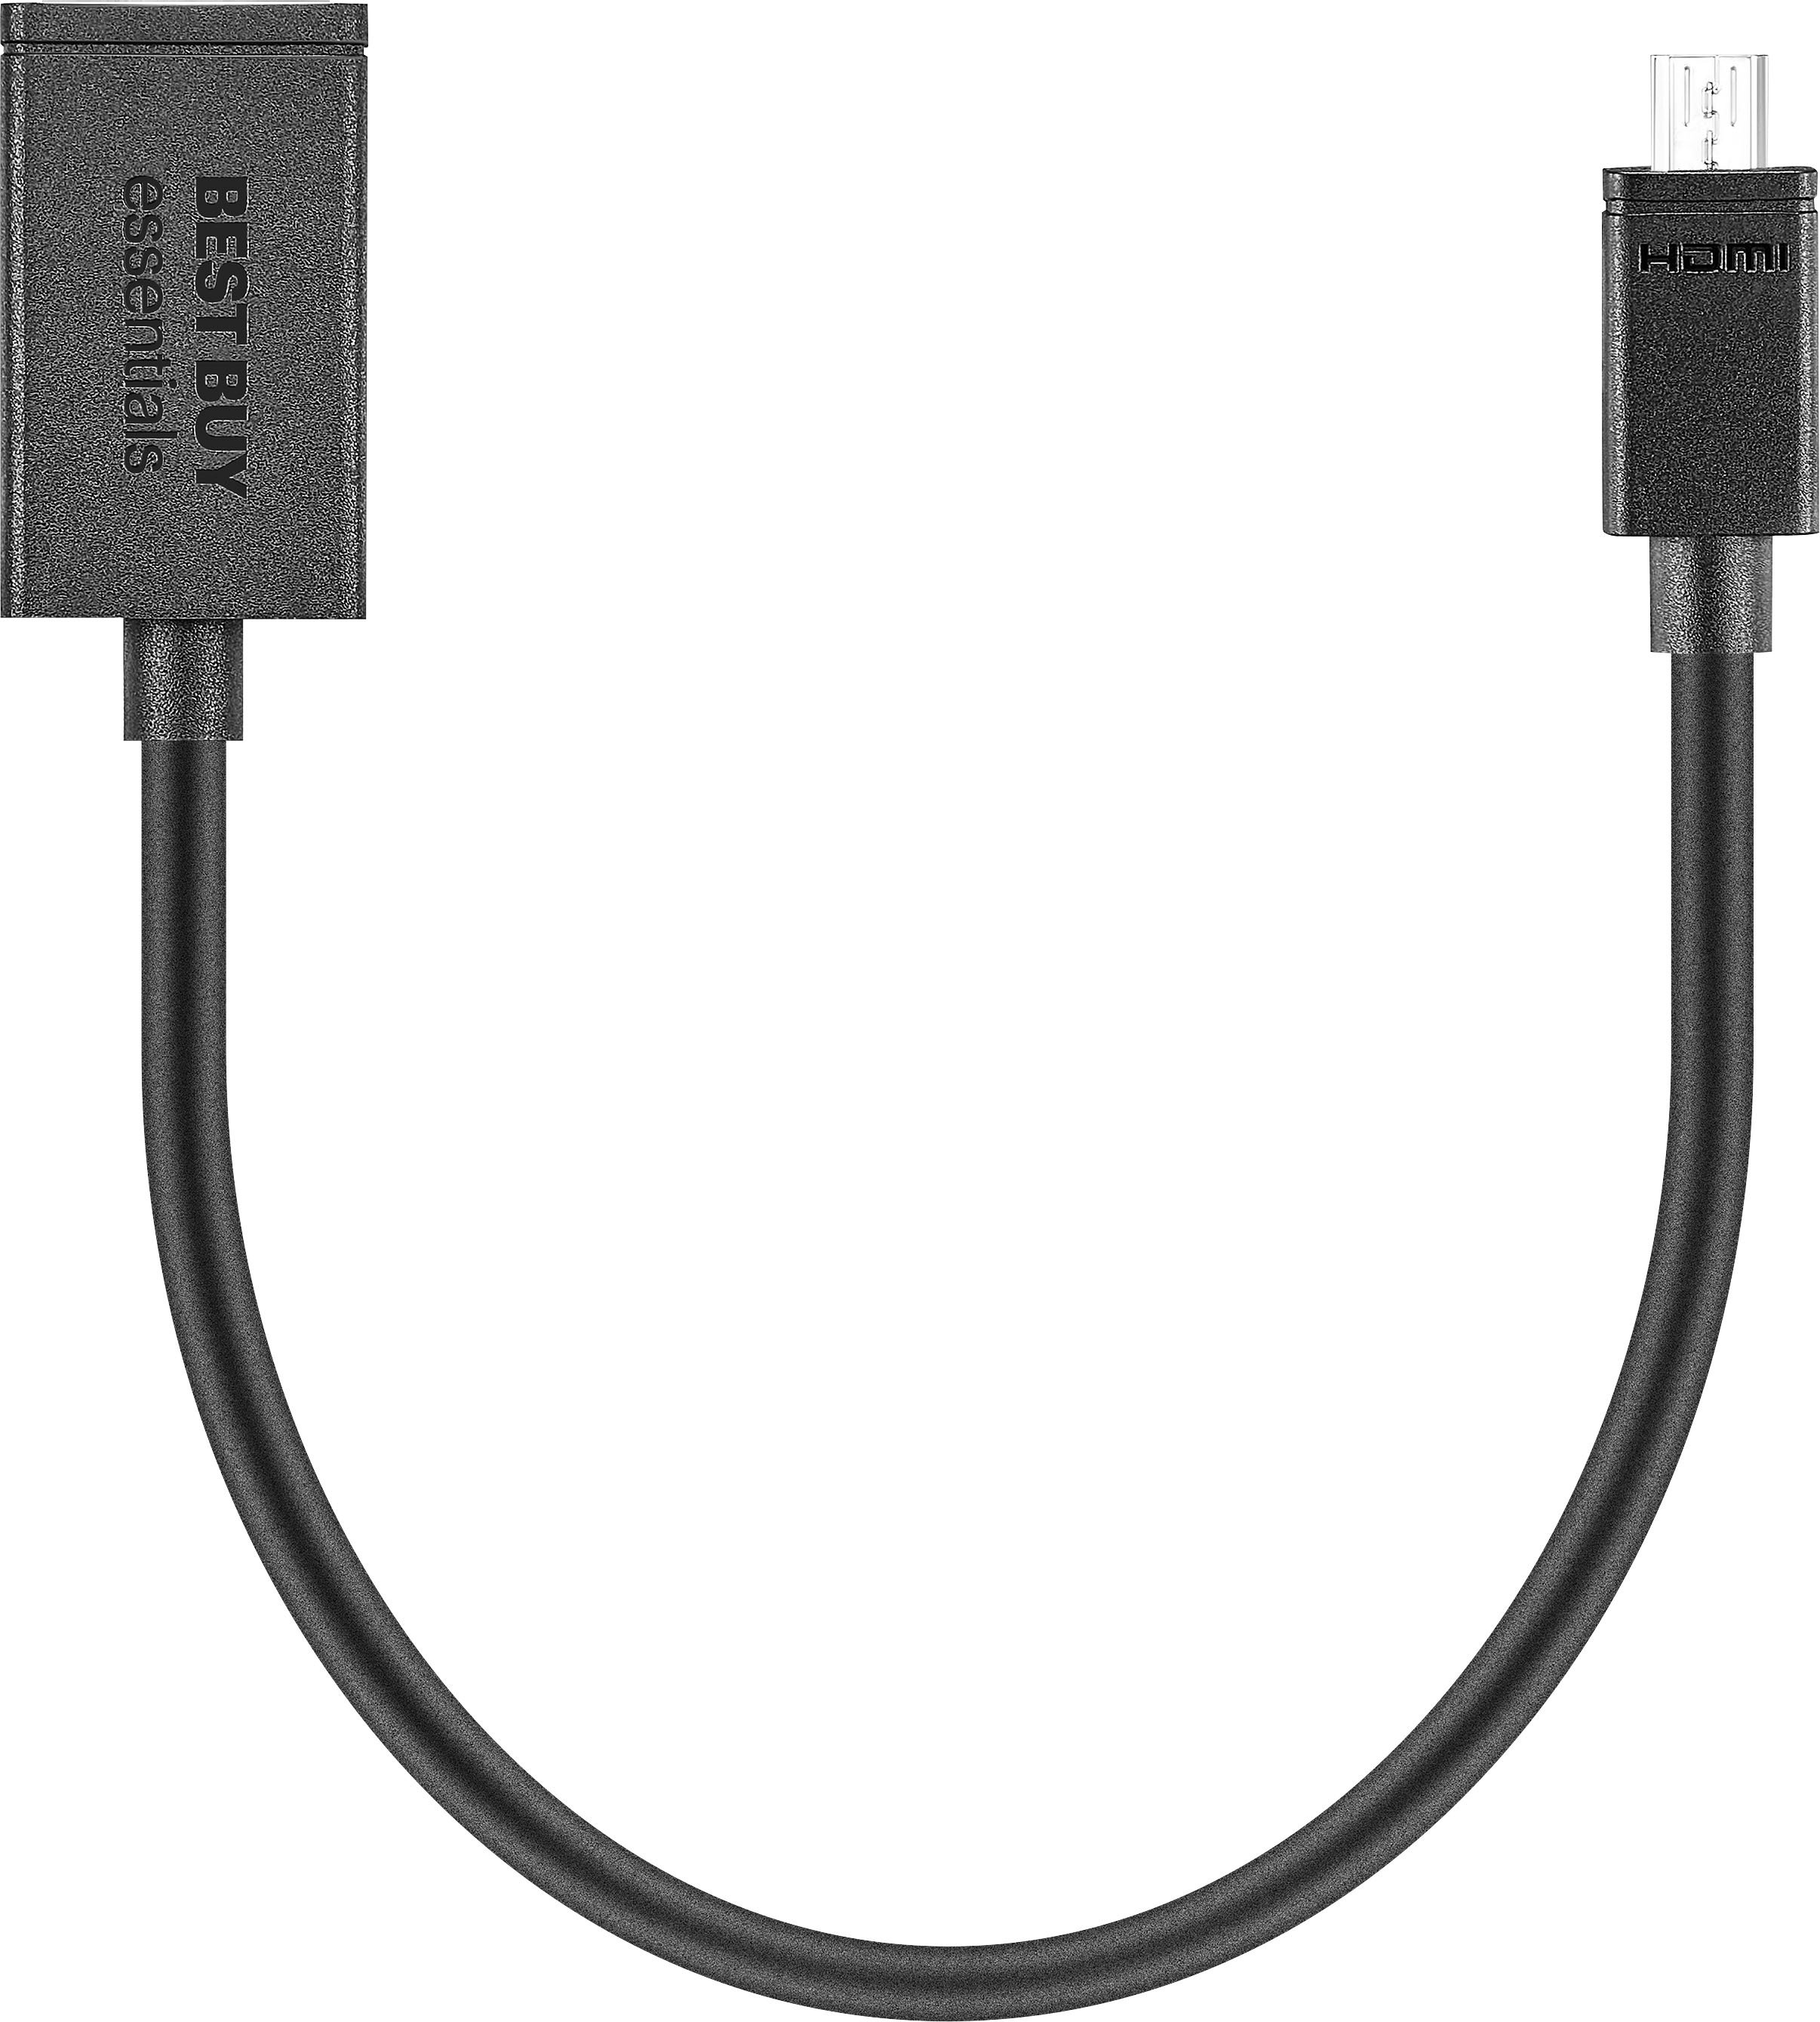 Micro HDMI to HDMI Adapter Black BE-HCL306 - Best Buy